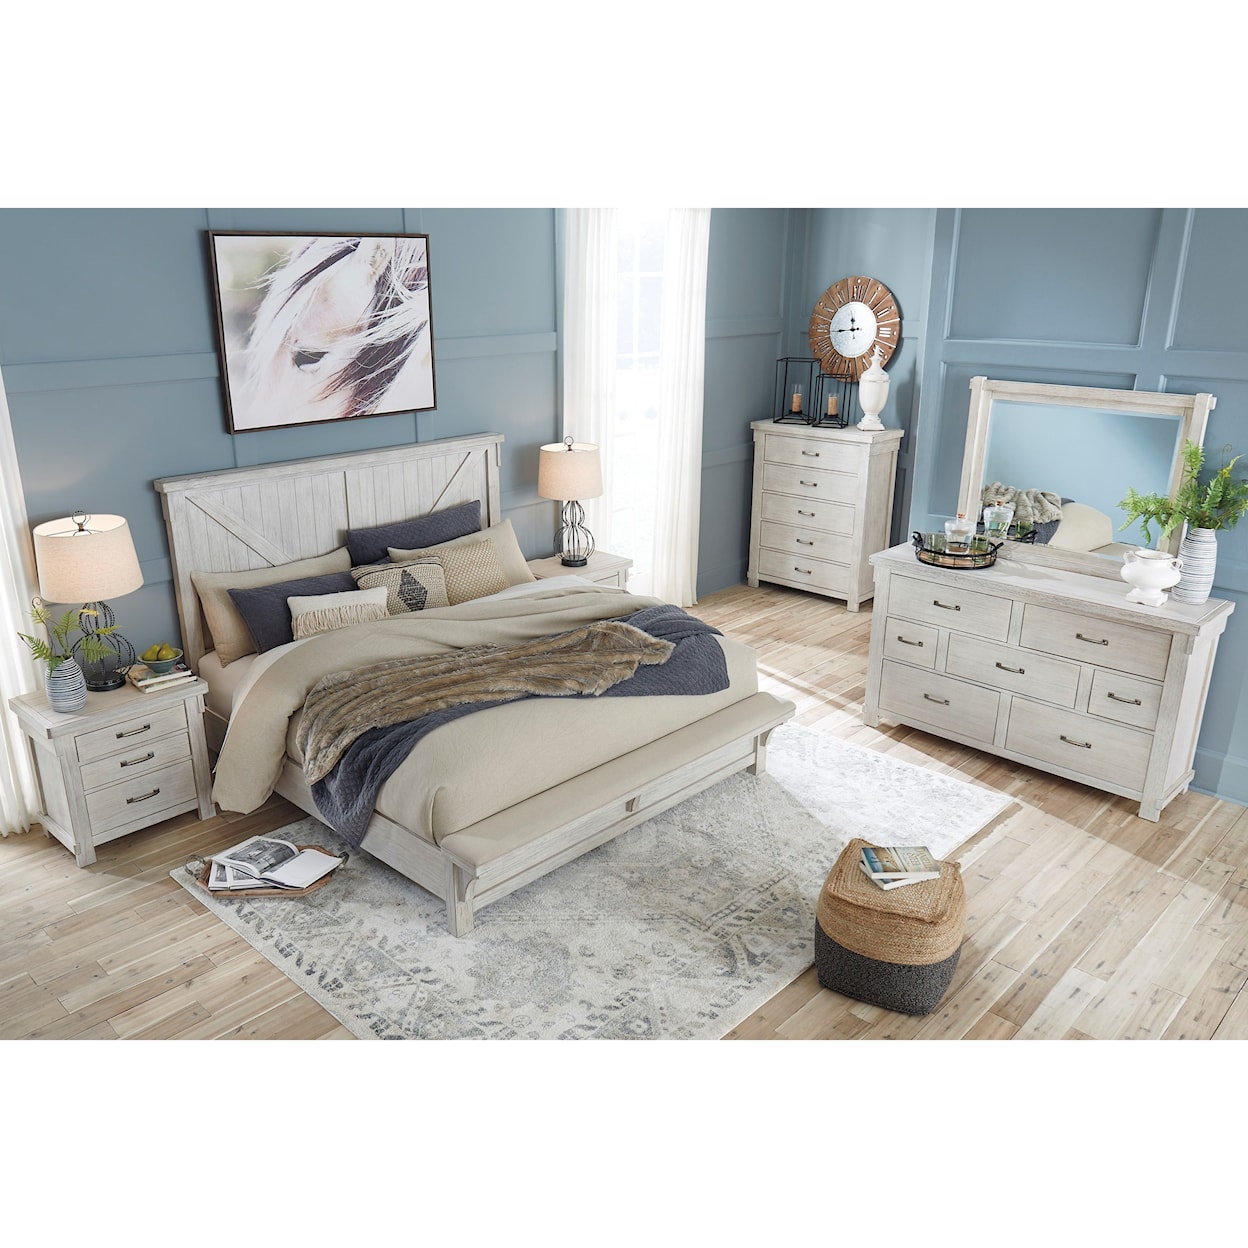 Signature Design by Ashley Furniture Brashland King Bed with Footboard Bench